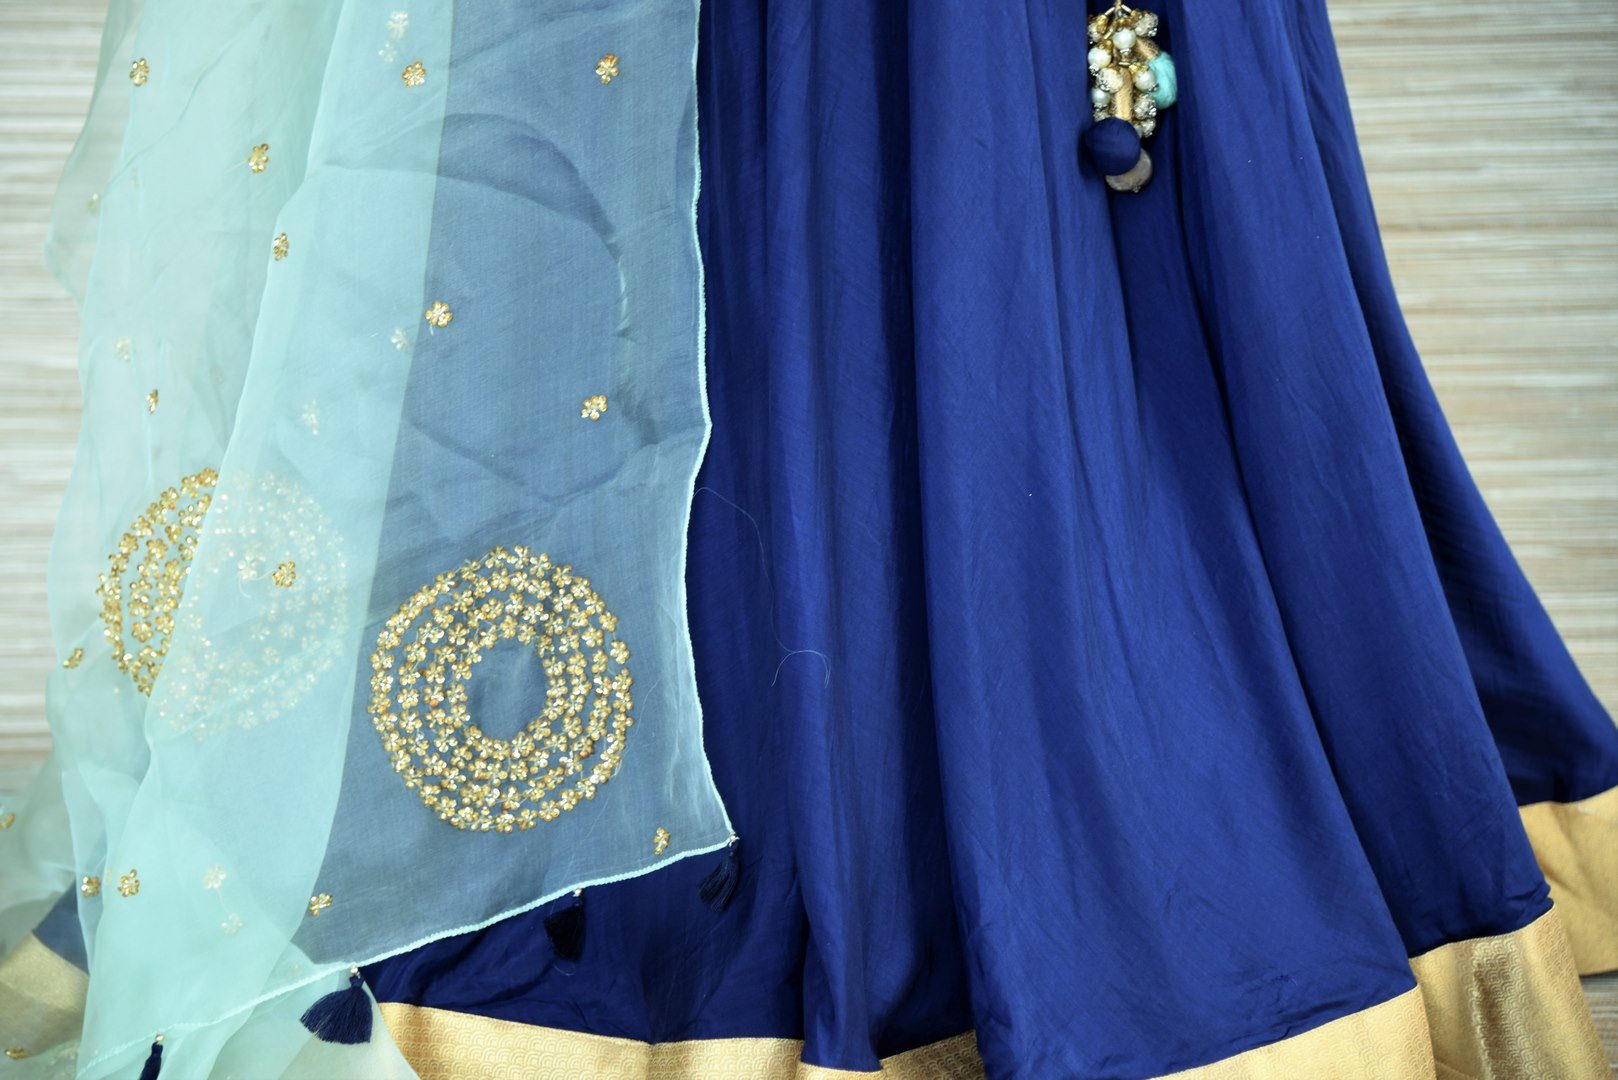 Buy beautiful dark blue chanderi silk floorlength Anarkali suit online in USA with light blue embroidered dupatta. Get your hands on exquisite Indian designer Anarkali suits in USA from Pure Elegance Indian clothing store for various special occasions like weddings and parties. Shop online now.-bottom